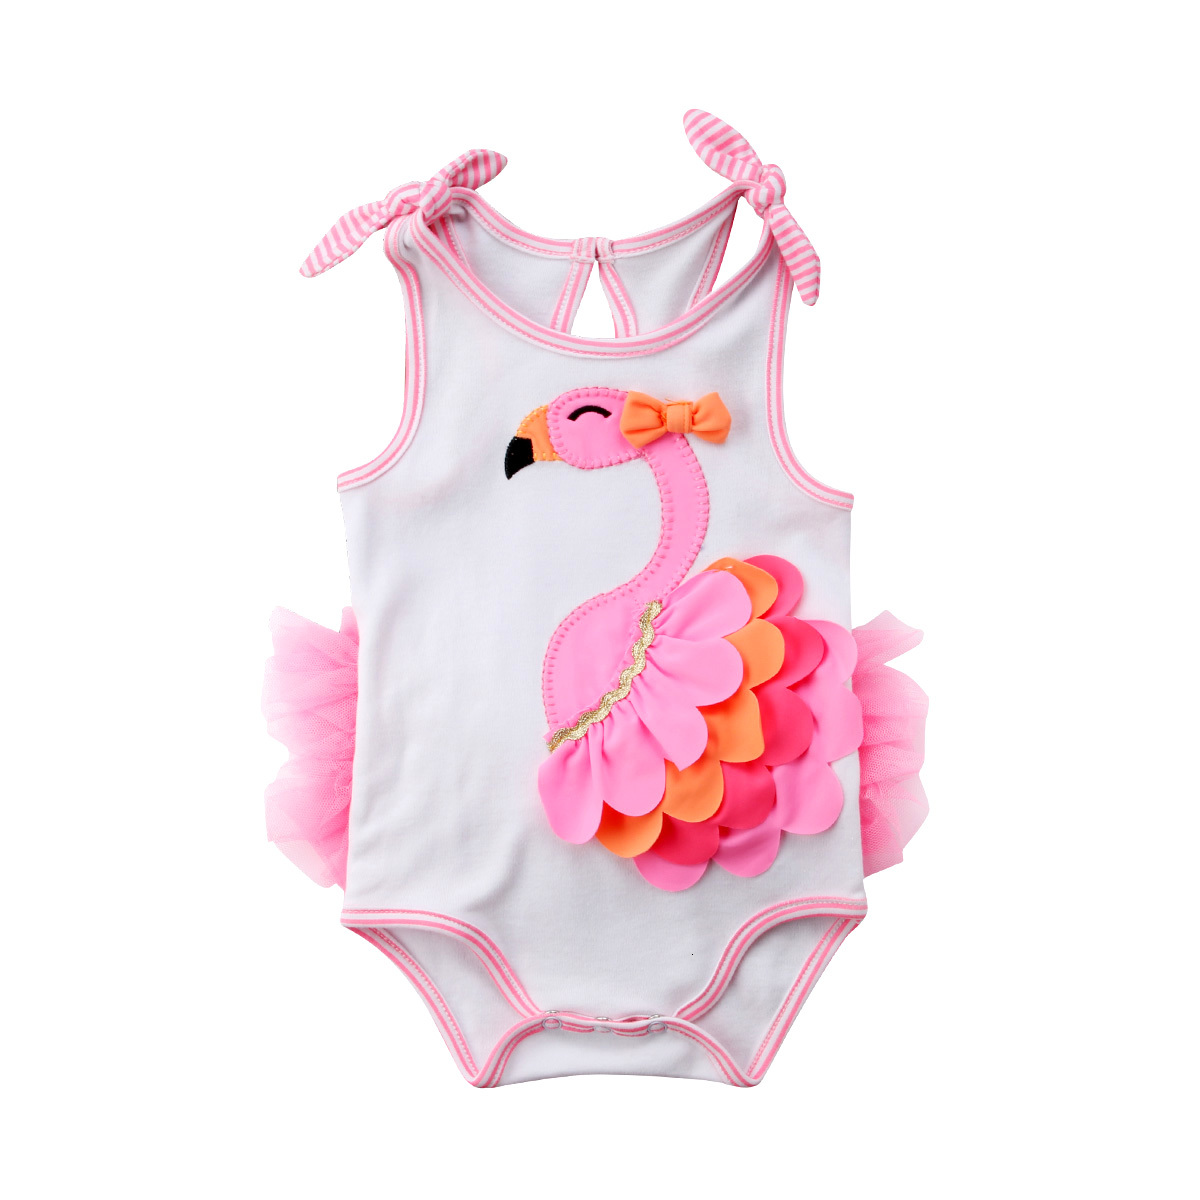 3d Animal Baby Clothes Online Shopping Buy 3d Animal Baby Clothes At Dhgate Com - cutest baby clothes roblox shop online for newborn baby